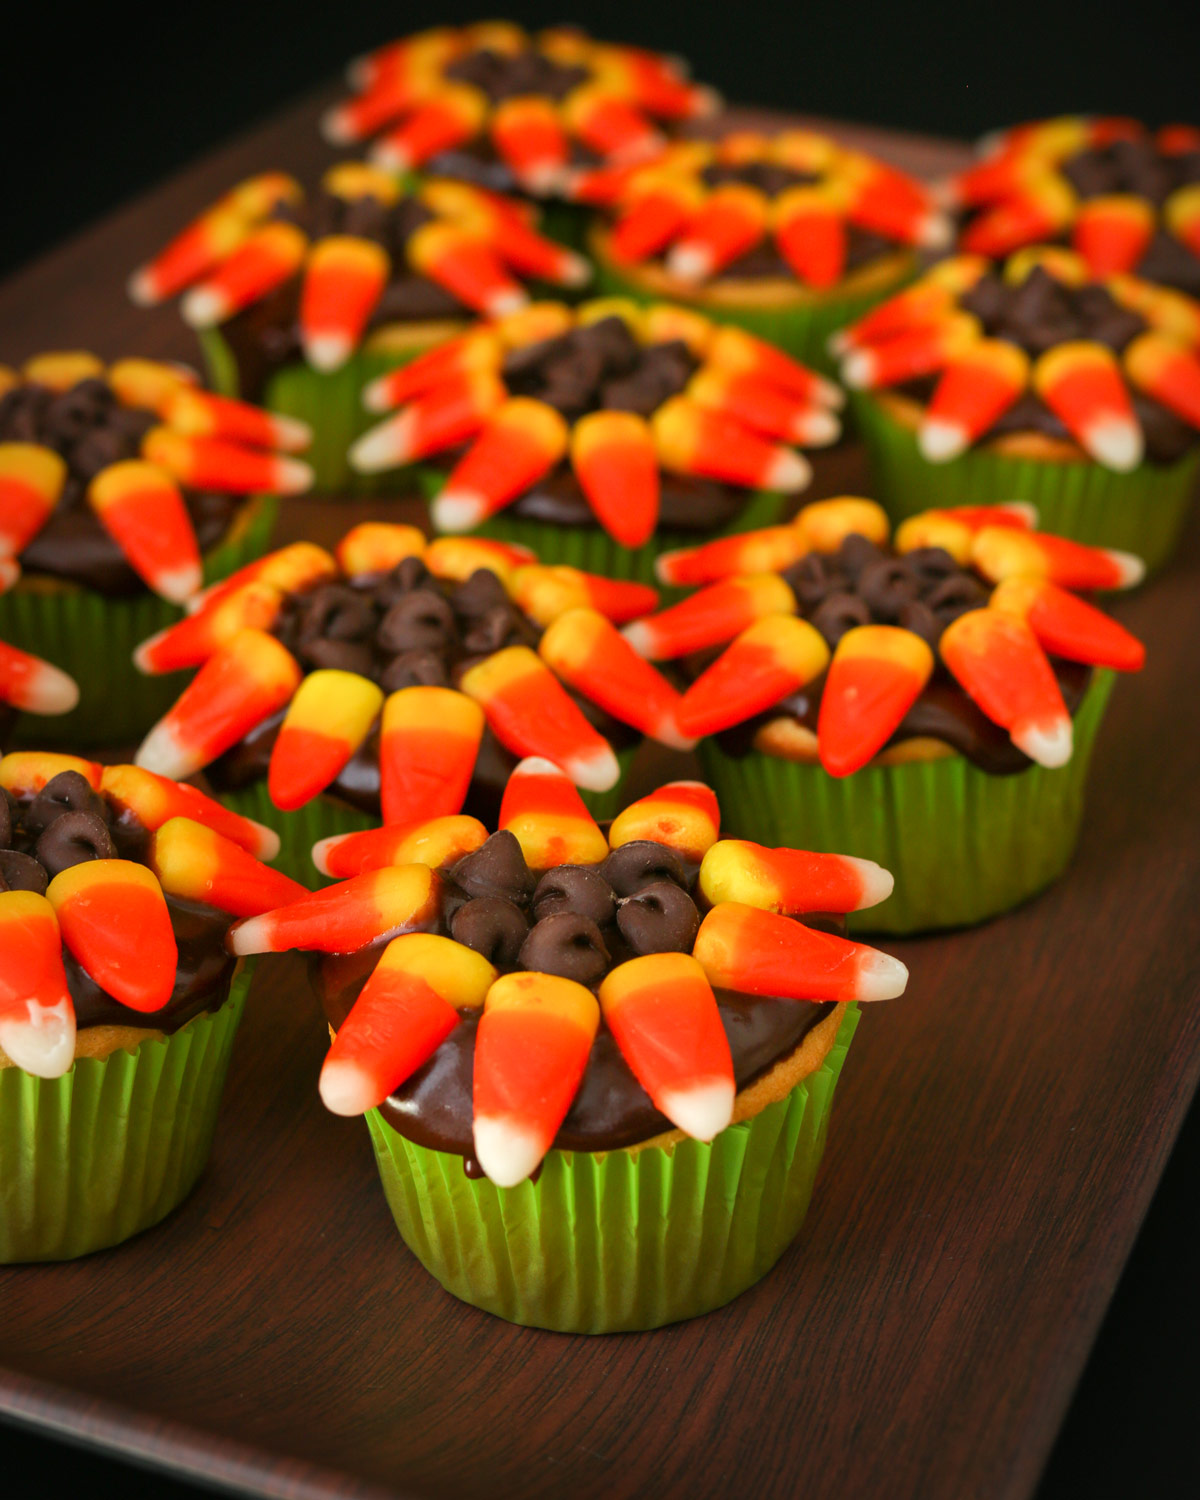 array of flower cupcakes on a brown tray from a side angle.